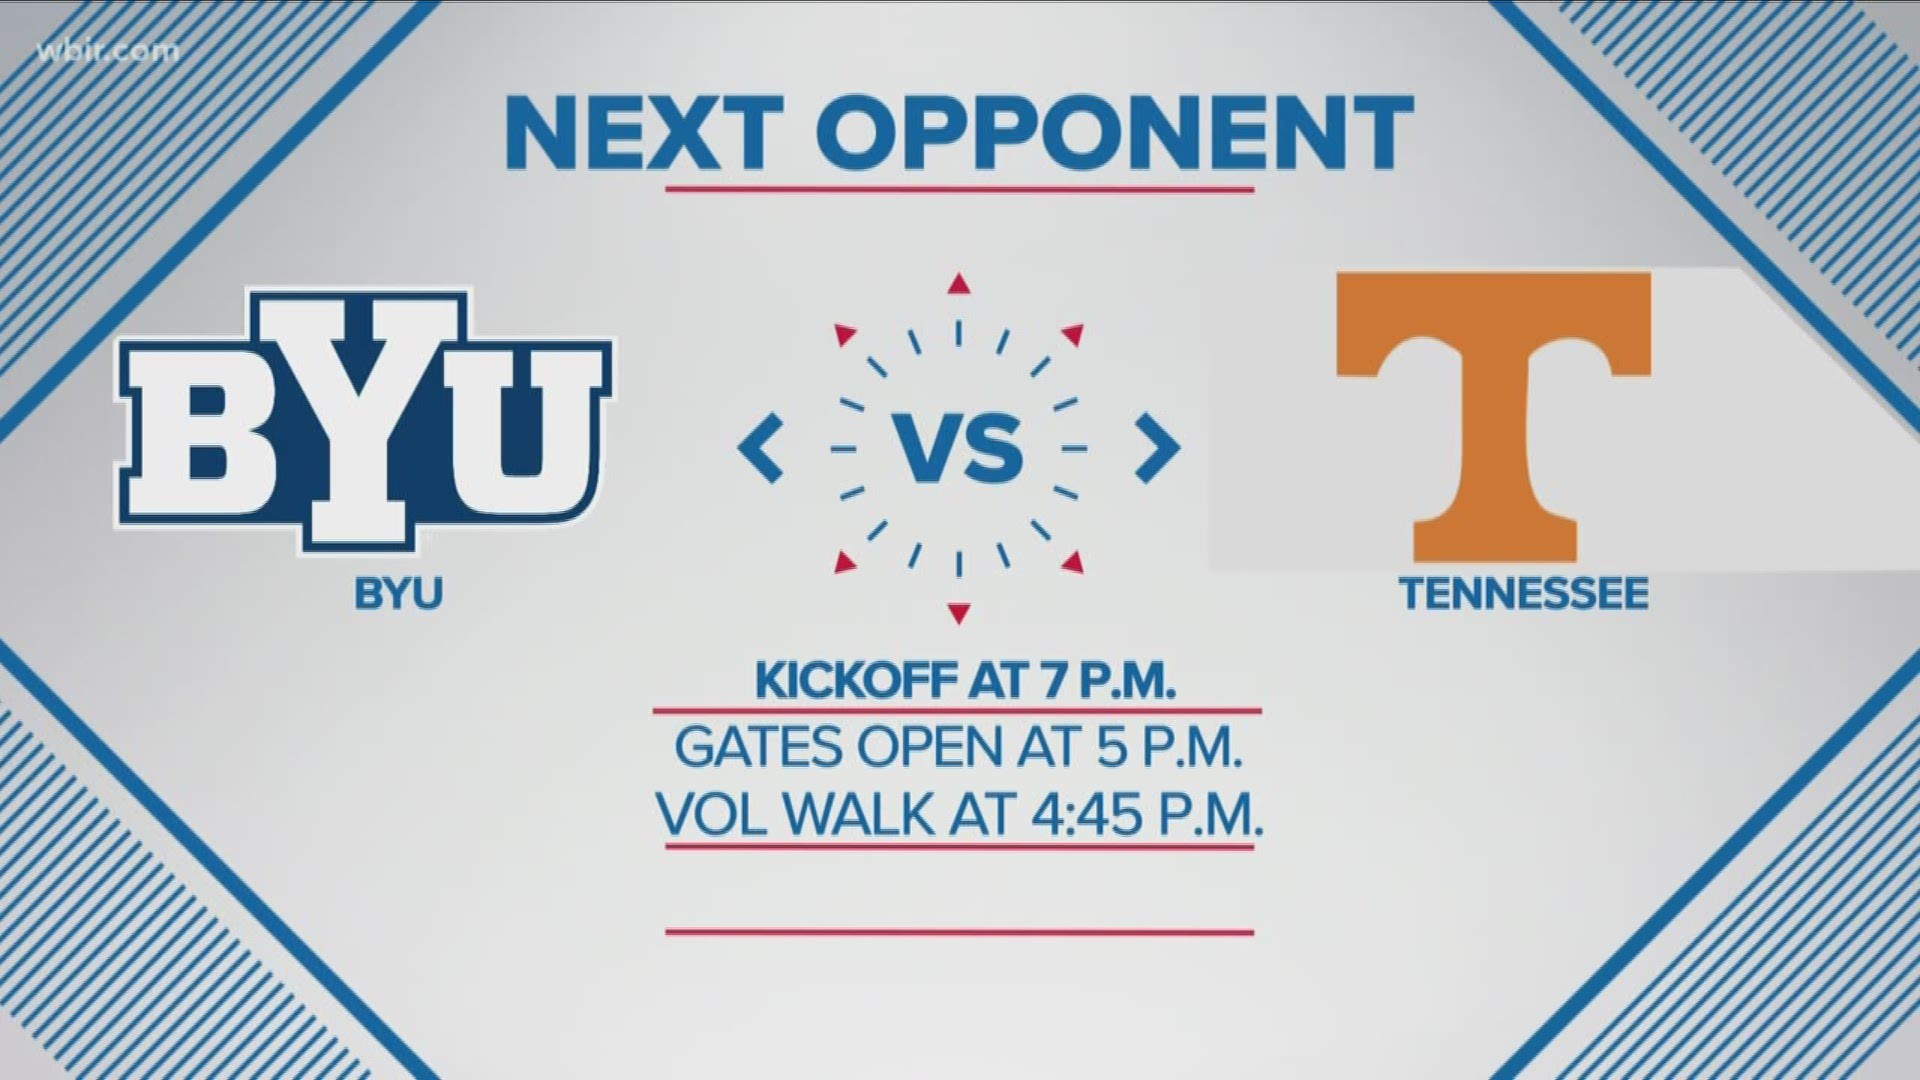 This is Tennessee's first ever meeting with BYU. The Vols kick off against the Cougars Saturday at 7 p.m.